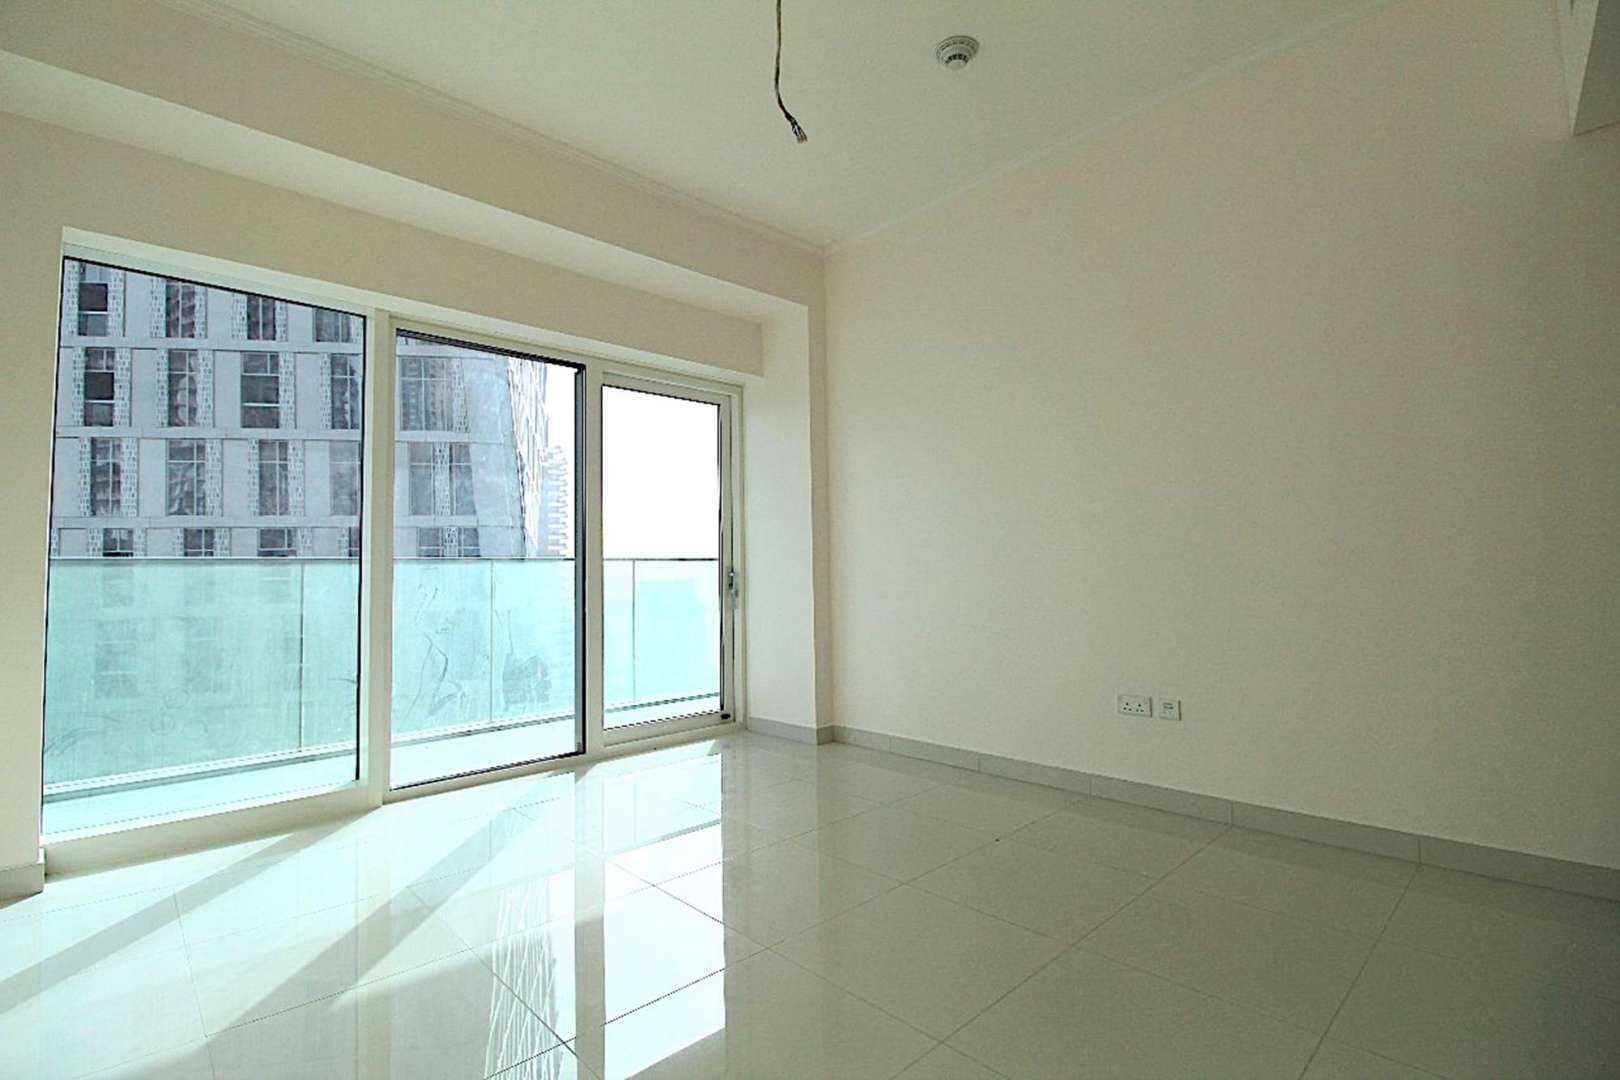 1 Bedroom Apartment For Rent Damac Heights Lp05734 Efea3f9a7294080.jpg